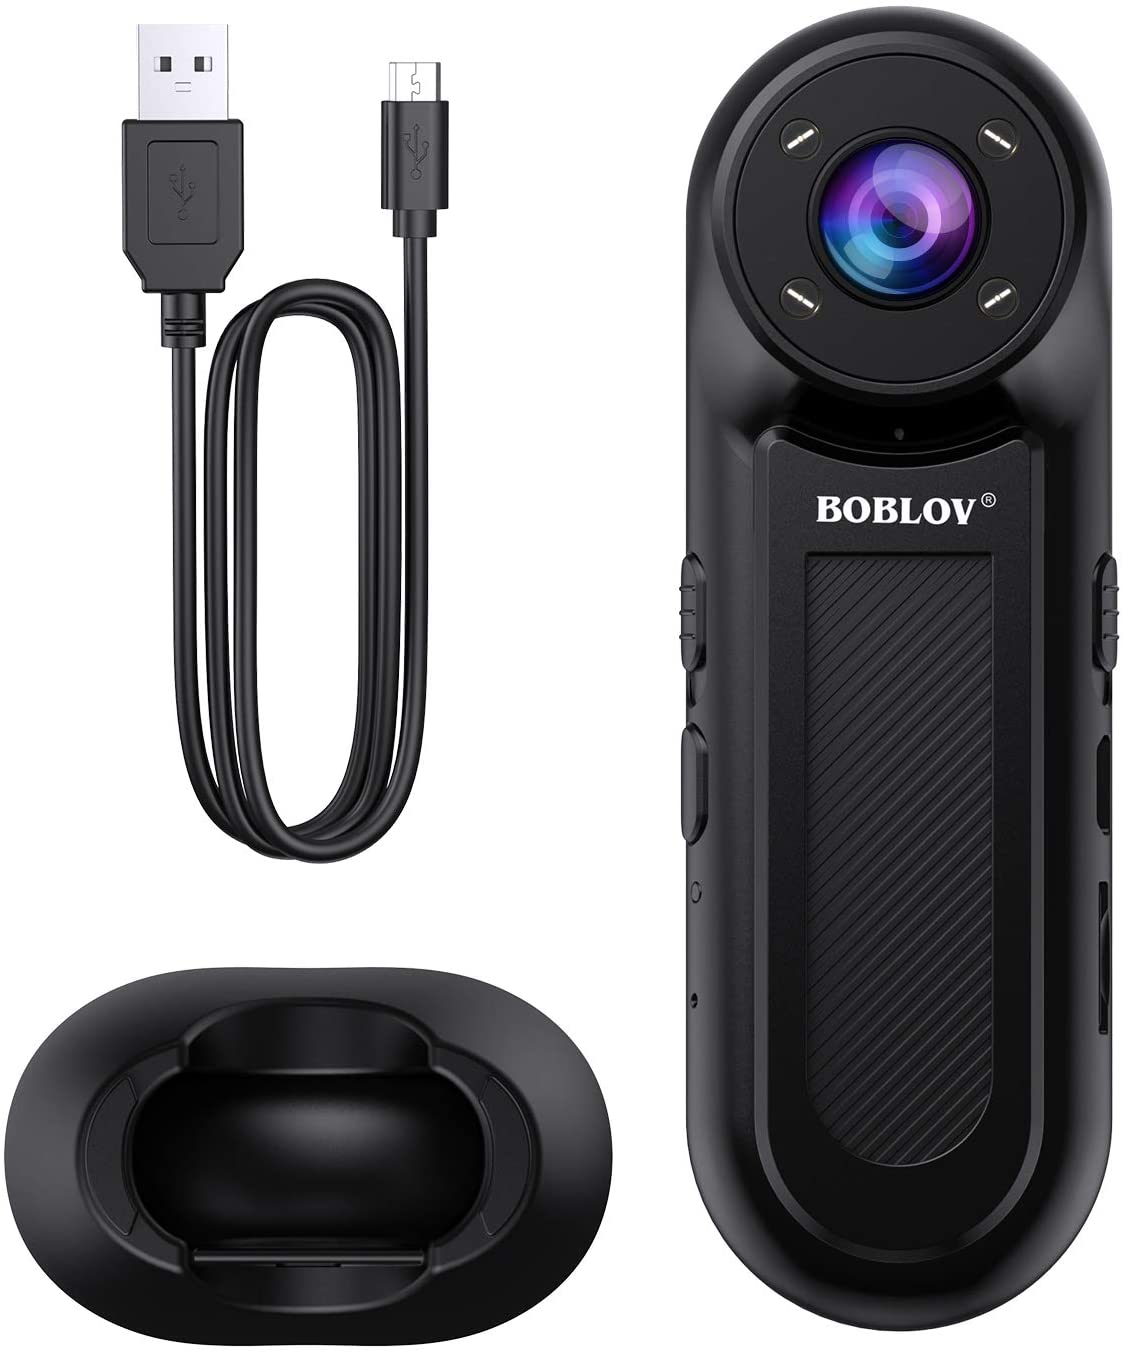 Boblov W2 small body camera with 1080P night vision and high-end Sony IMX307 sensor1